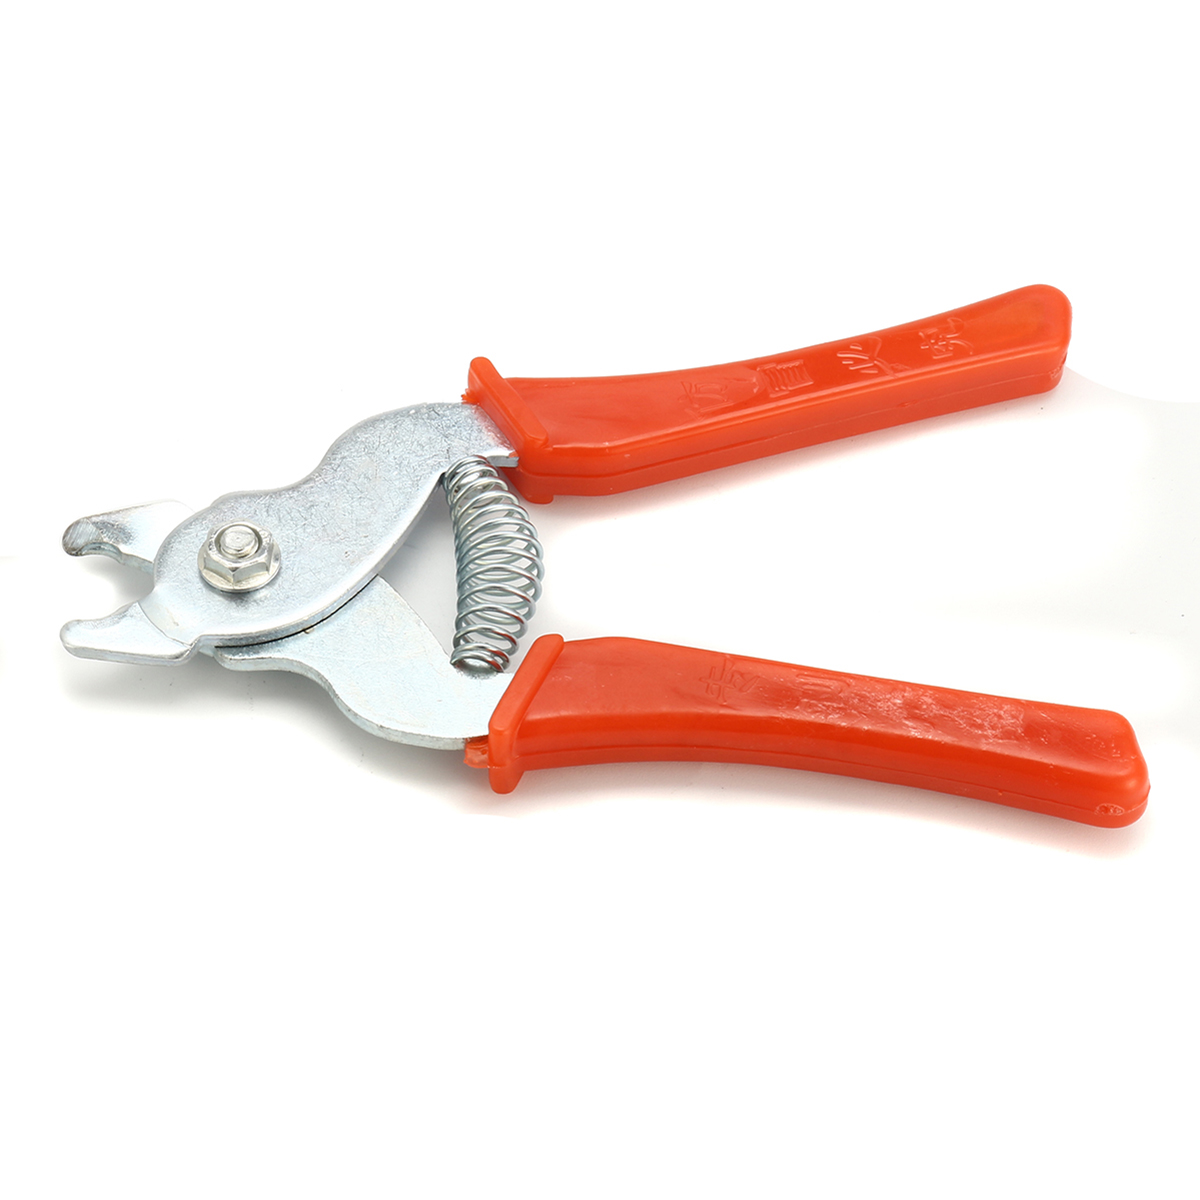 Hog-Ring-Pliers-Tool-M-Clip-Staples-Bird-Chicken-Mesh-Cage-Wire-Fencing-Netting-1316667-3